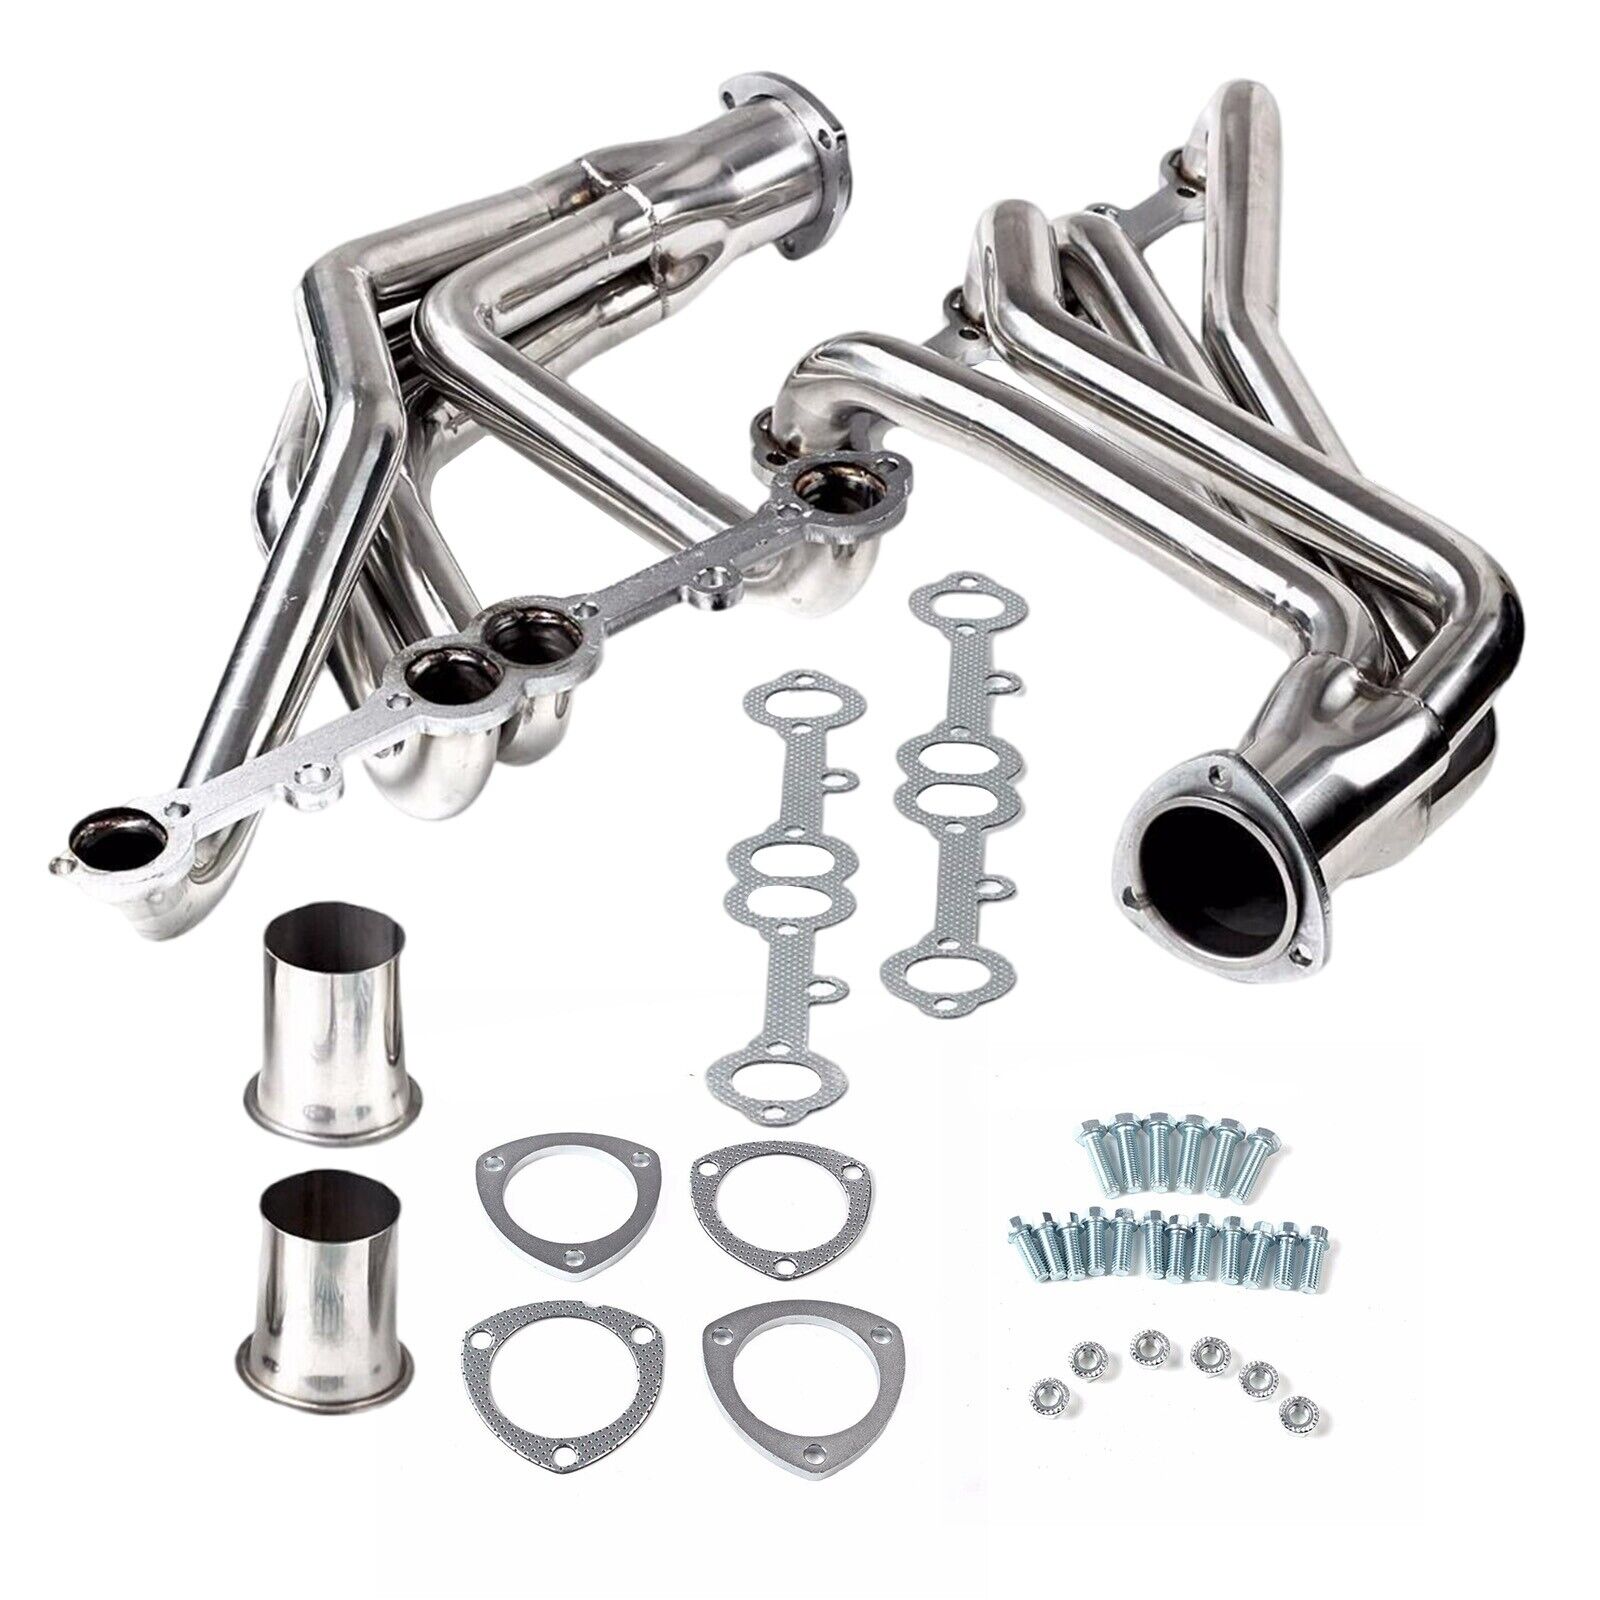 Stainless Manifold Headers Fit 64-74 Chevy 283/302/305/307/327/350/400 Engines